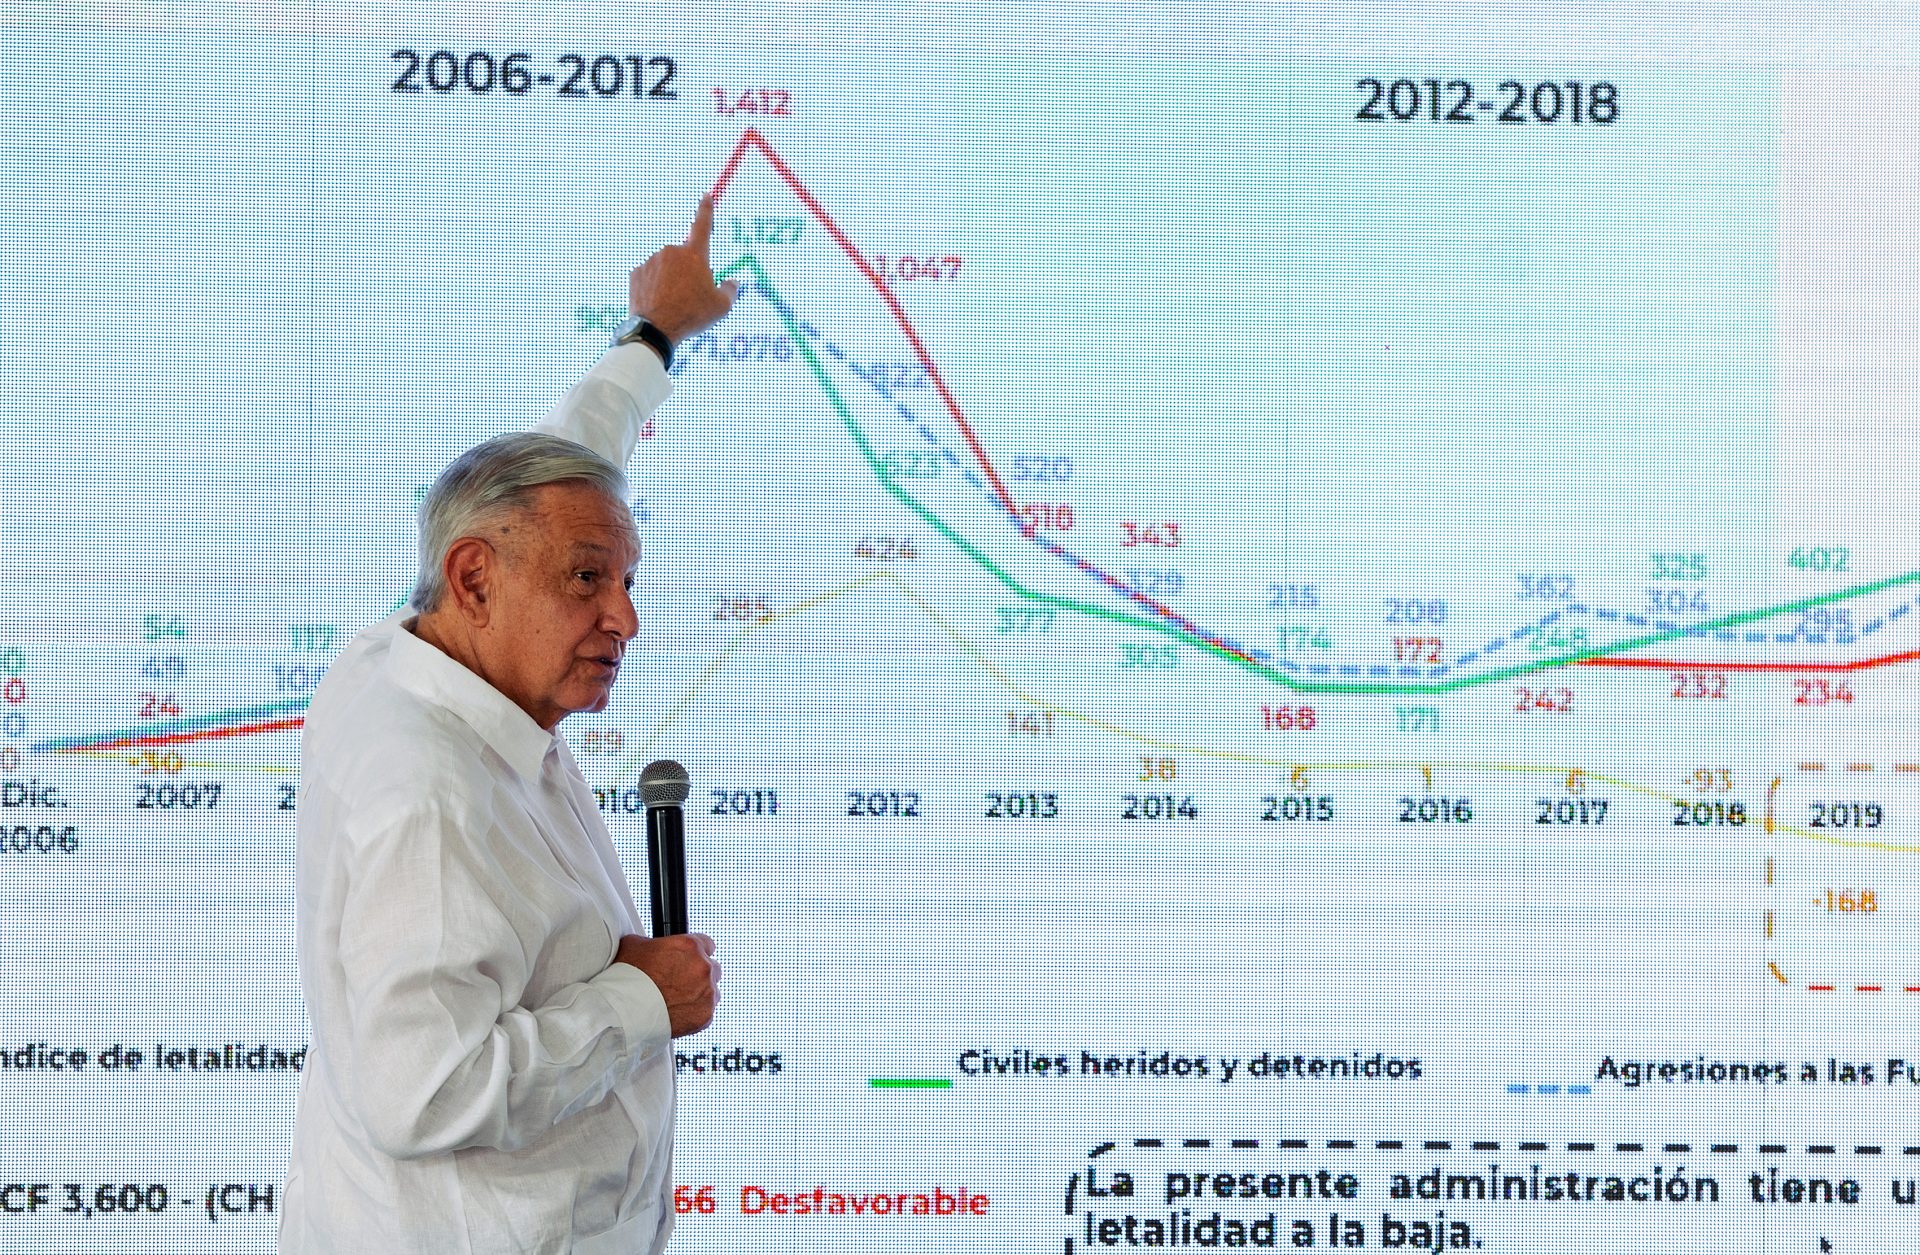 Photograph provided by the Presidency of Mexico of the Mexican president, Andrés Manuel López Obrador, during a press conference in Ciudad Madero (Mexico).  BLAZETRENDS/Presidency of the Republic